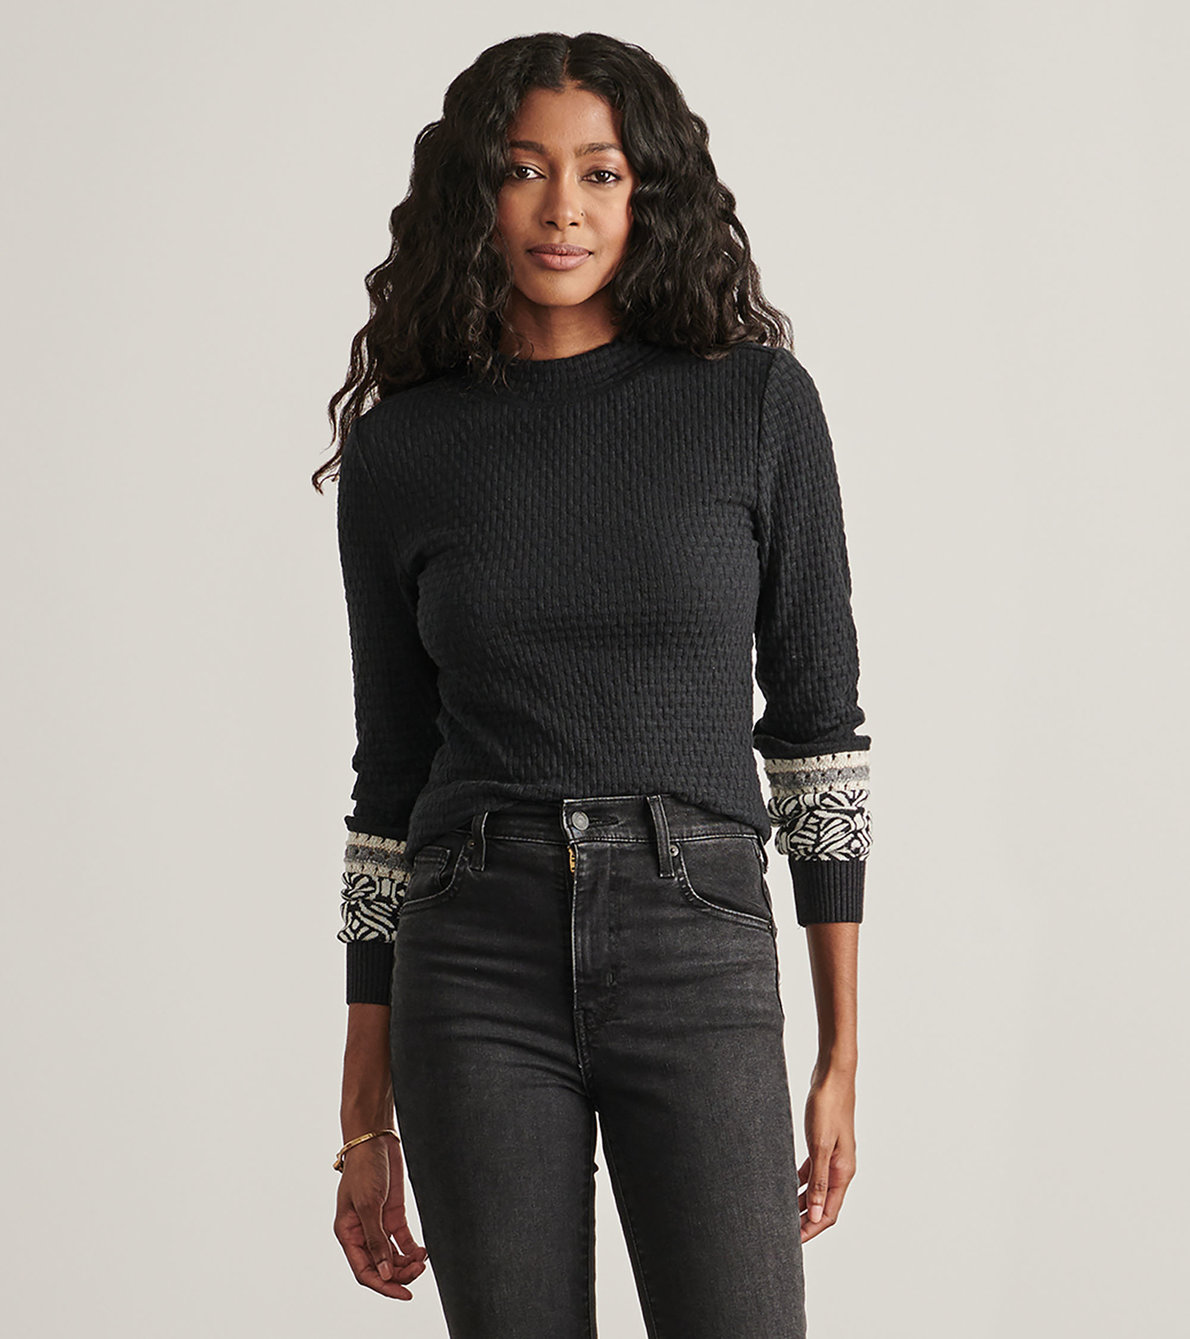 View larger image of Aspen Sweater - Black